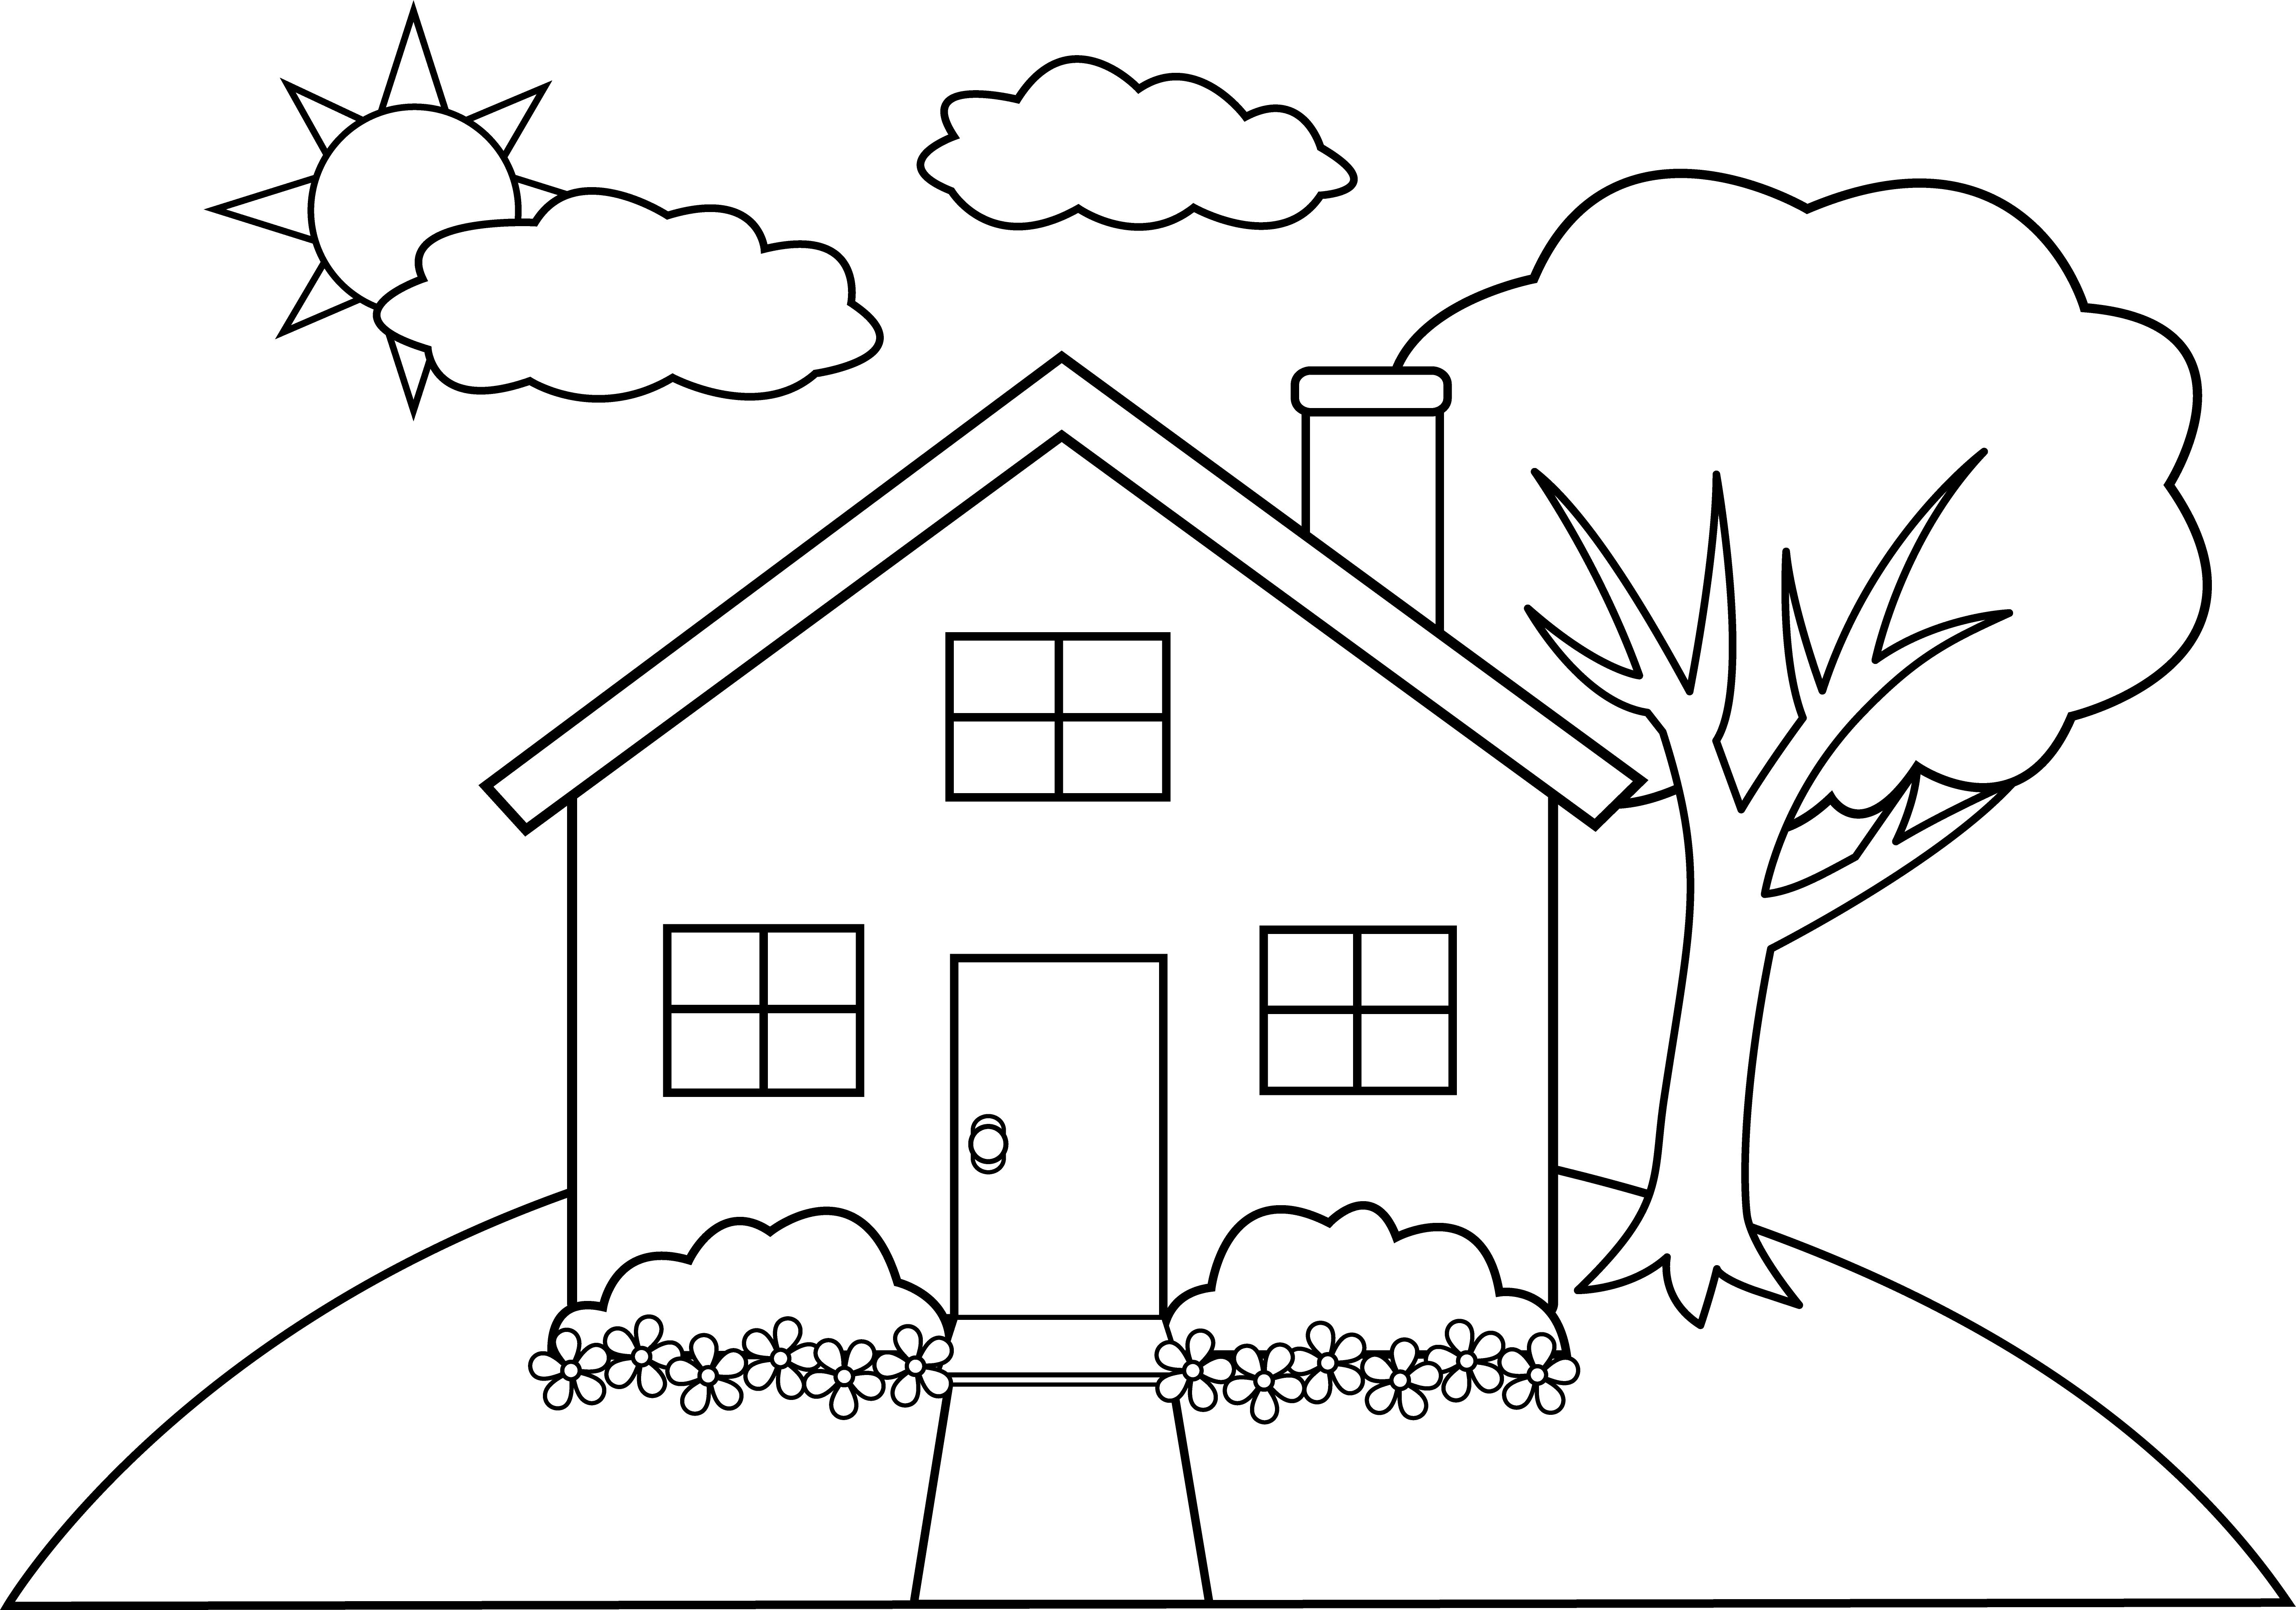 Drawing House #66482 (Buildings and Architecture) – Printable coloring pages